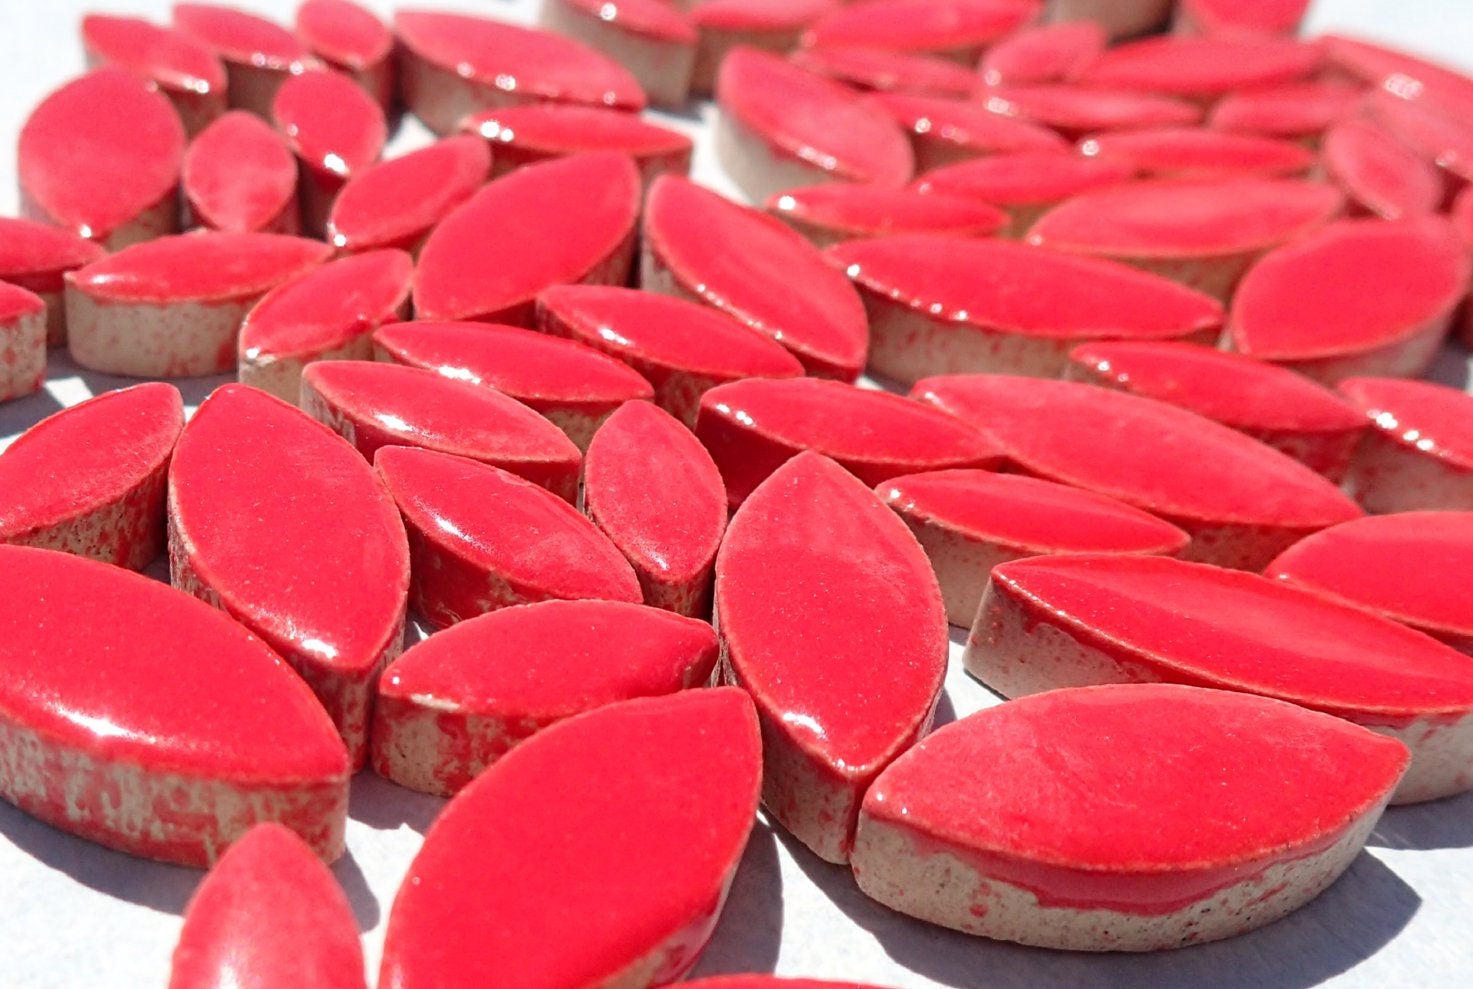 Bright Red Petals Mosaic Tiles - 50g Ceramic Leaves in 2 Sizes